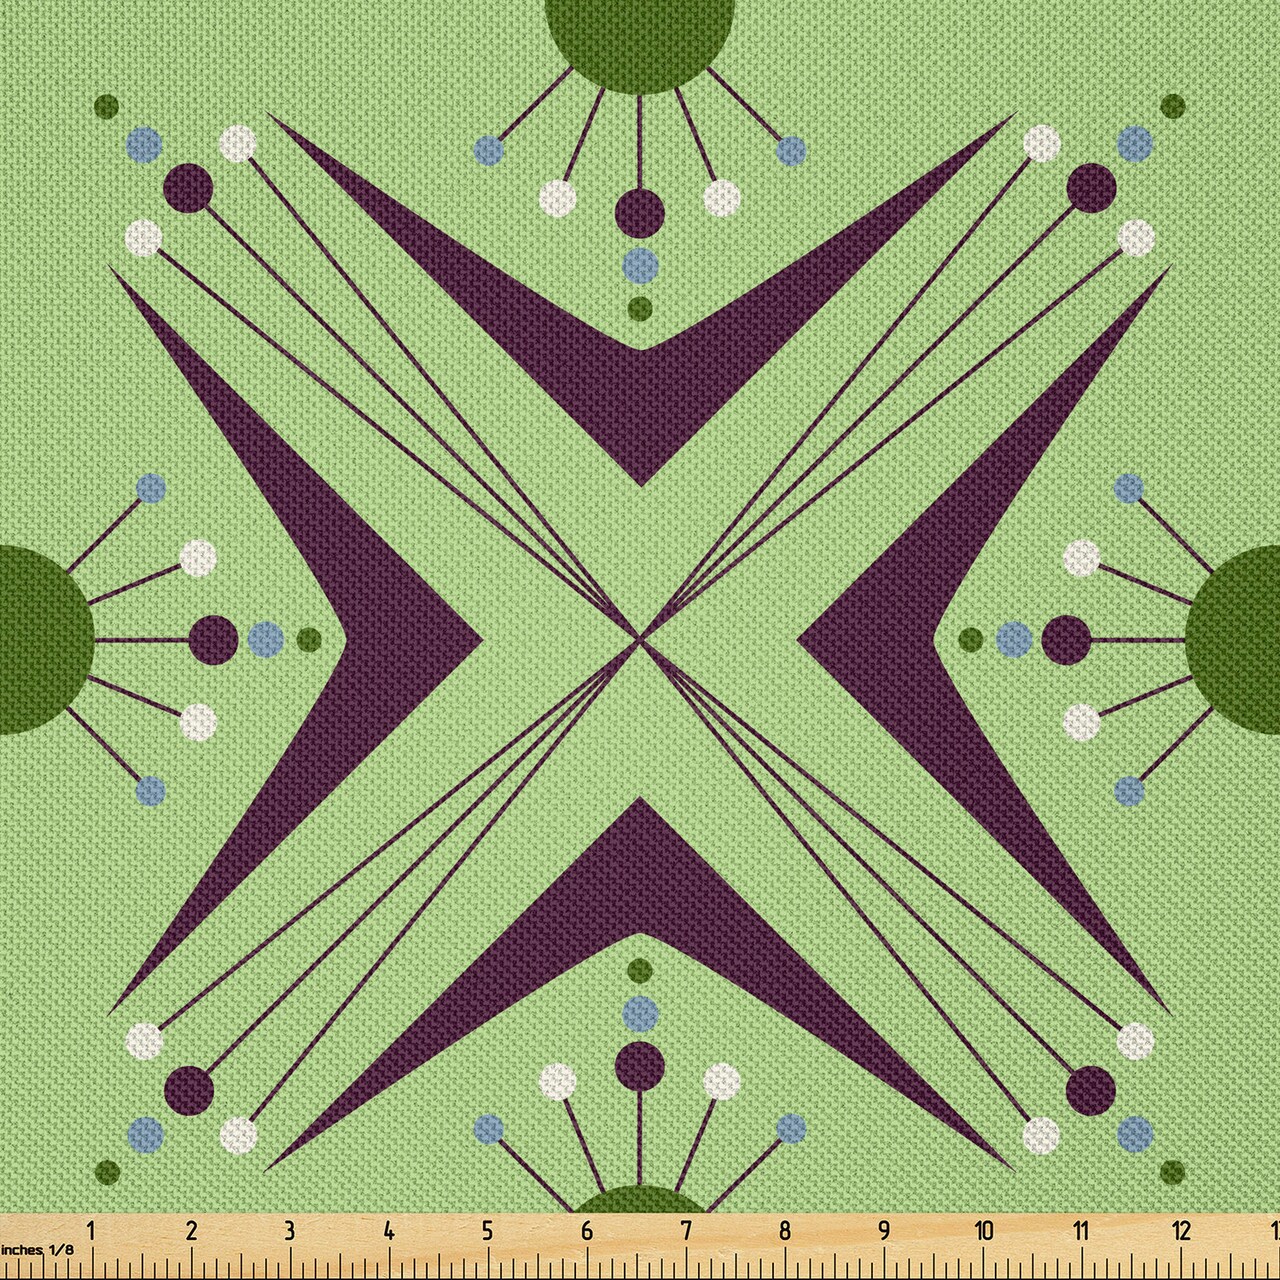 Ambesonne Mid Century Fabric by The Yard, Atomic Form Boomerang Details Dots and Crossed Lines, Decorative Satin Fabric for Home Textiles and Crafts, 1 Yards, Green Plum